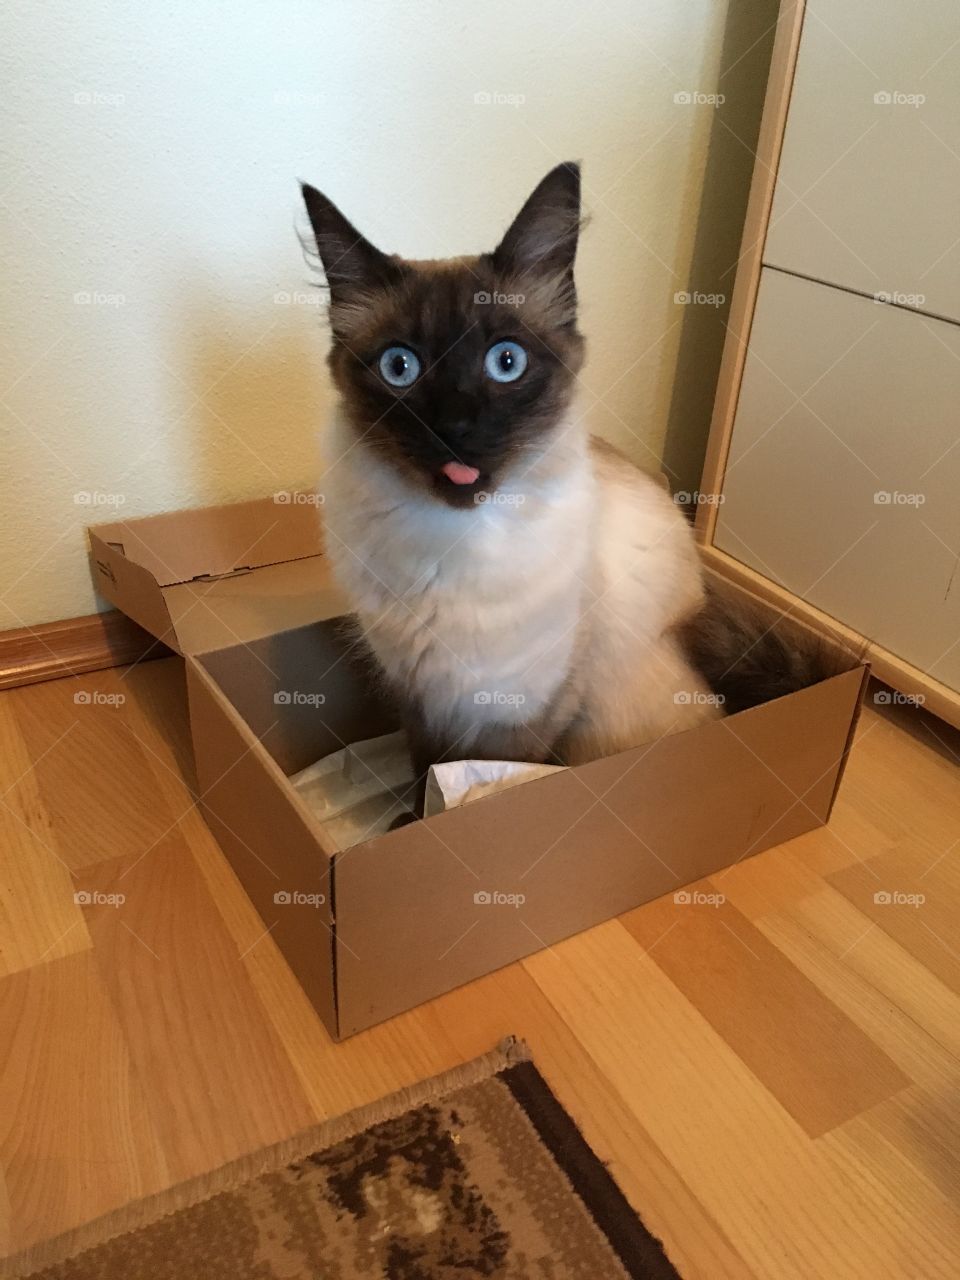 Cute funny siamese cat sitting in a box, shot taken at the right moment